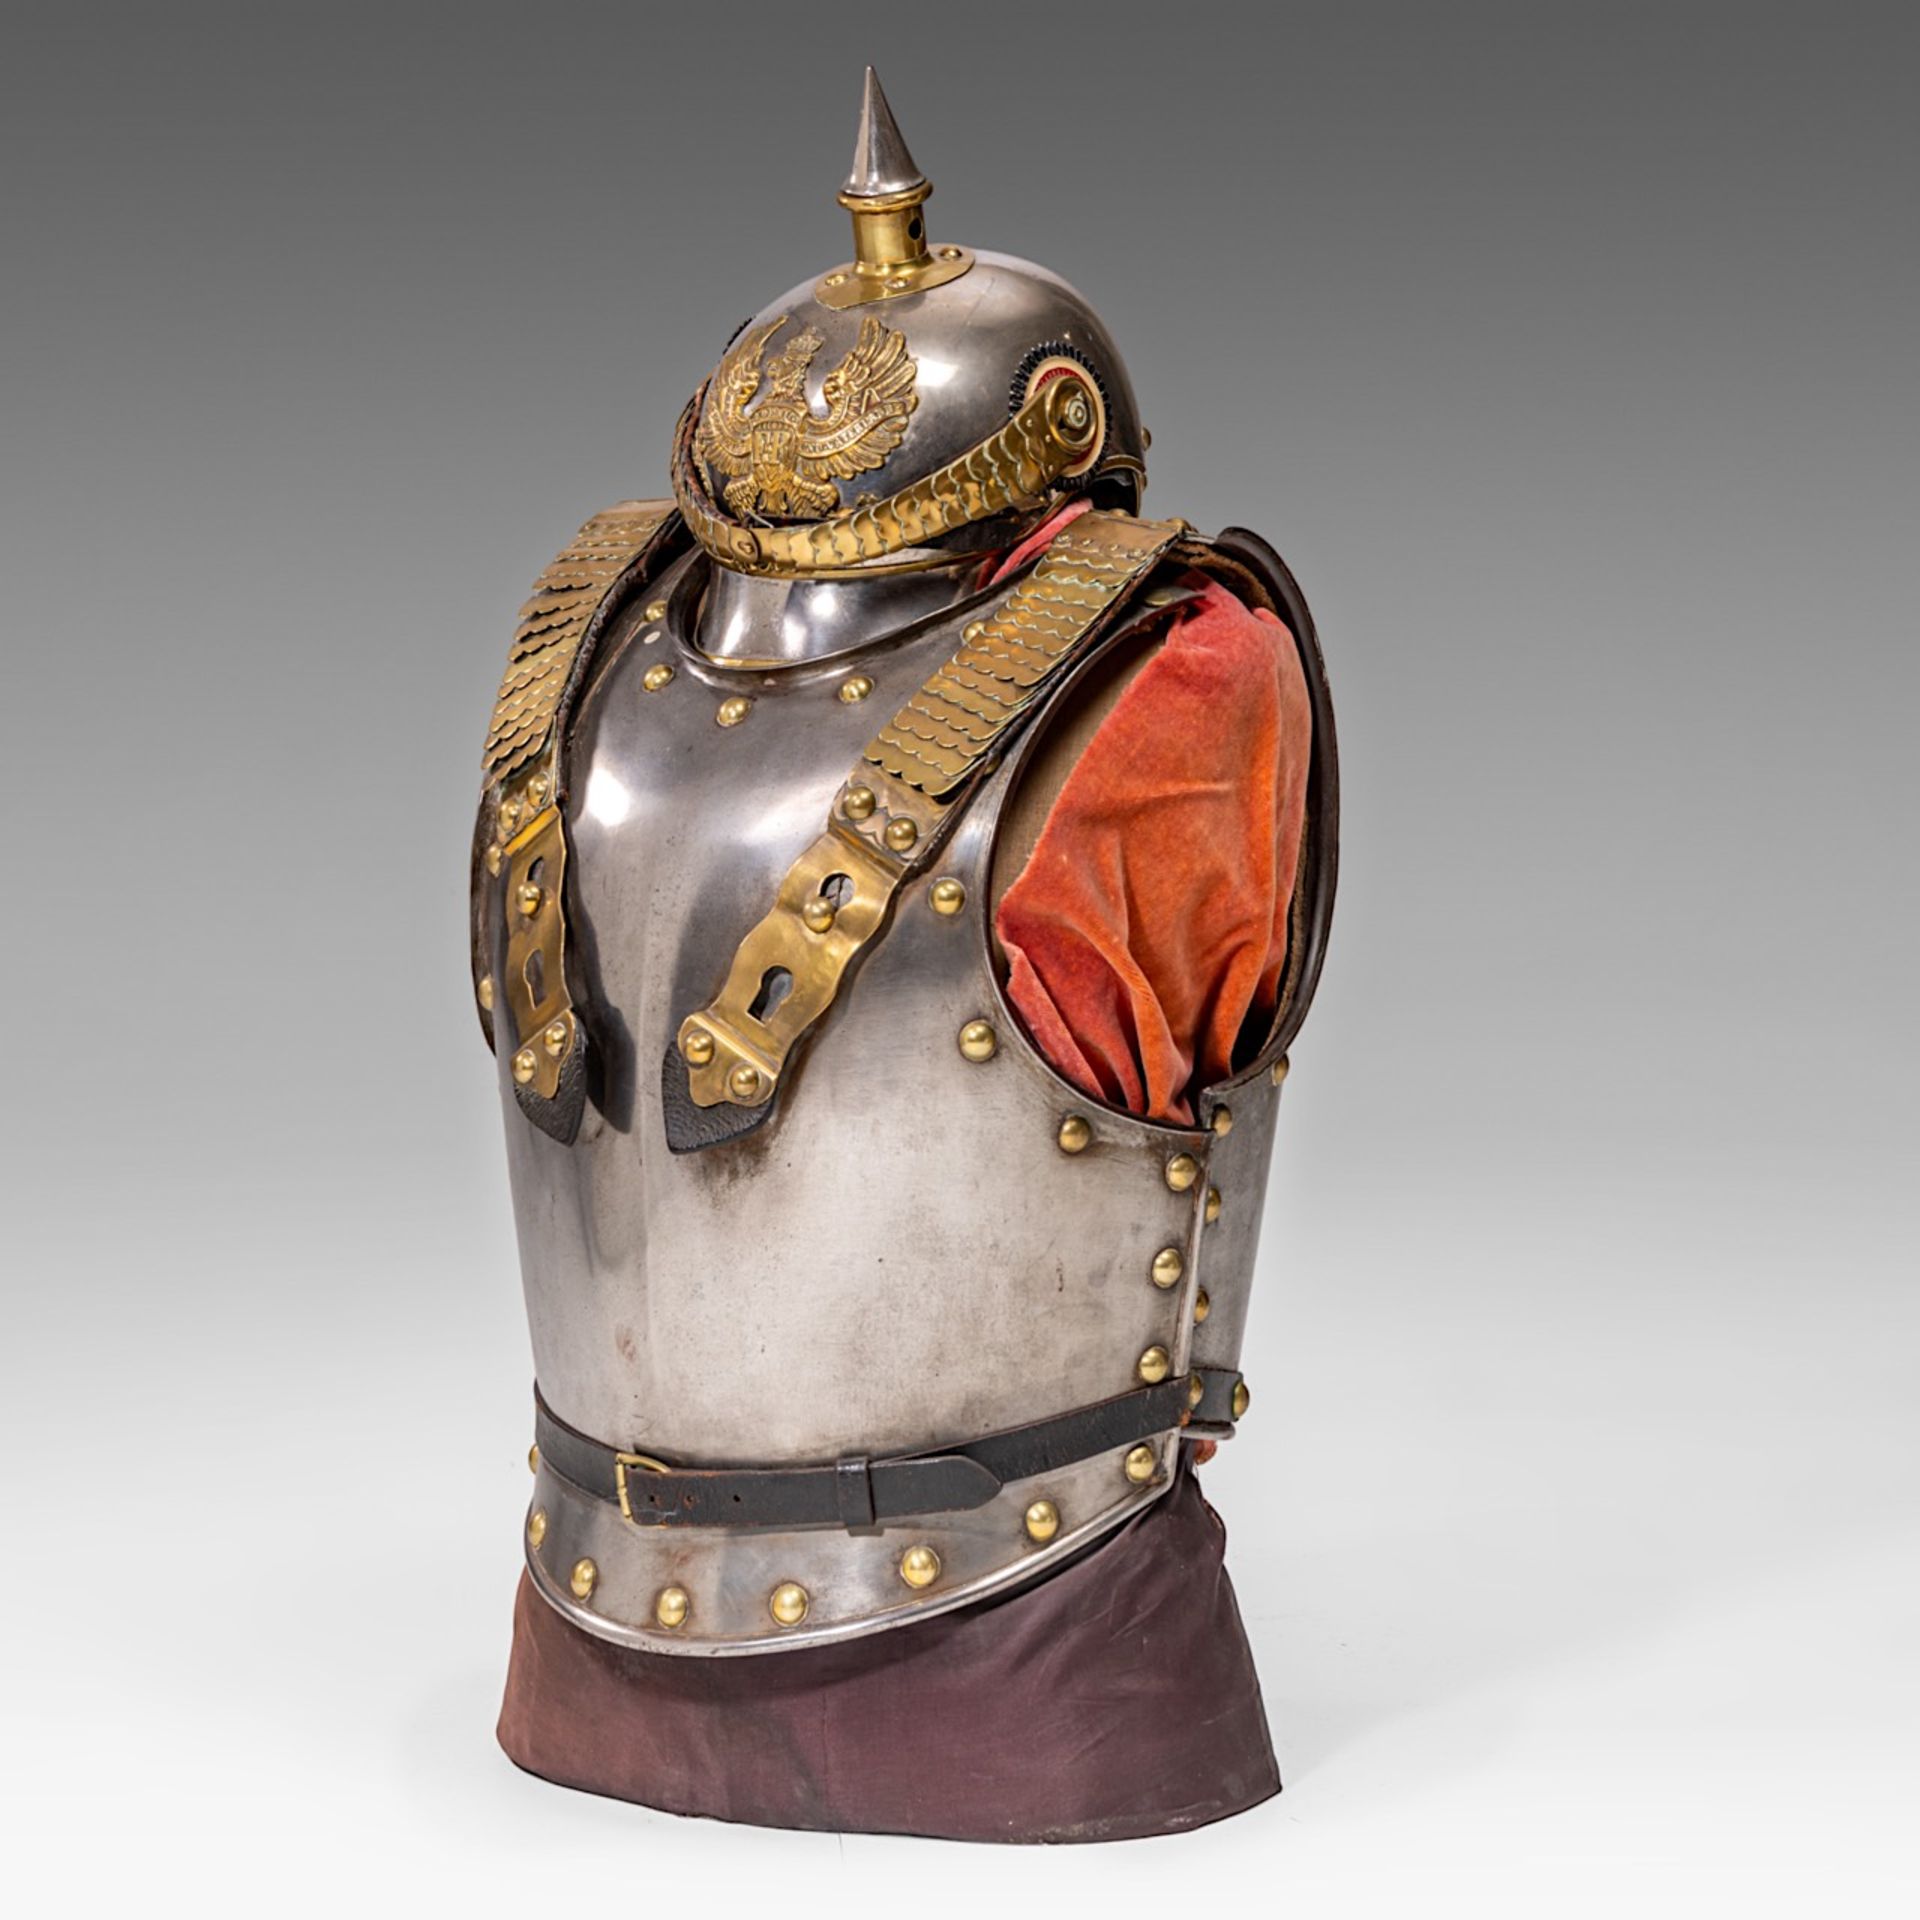 Cuirass and helmet, metal and gilded brass, 19thC., 68 x 30 x 36 cm. (26.7 x 11.8 x 14.1 in.)